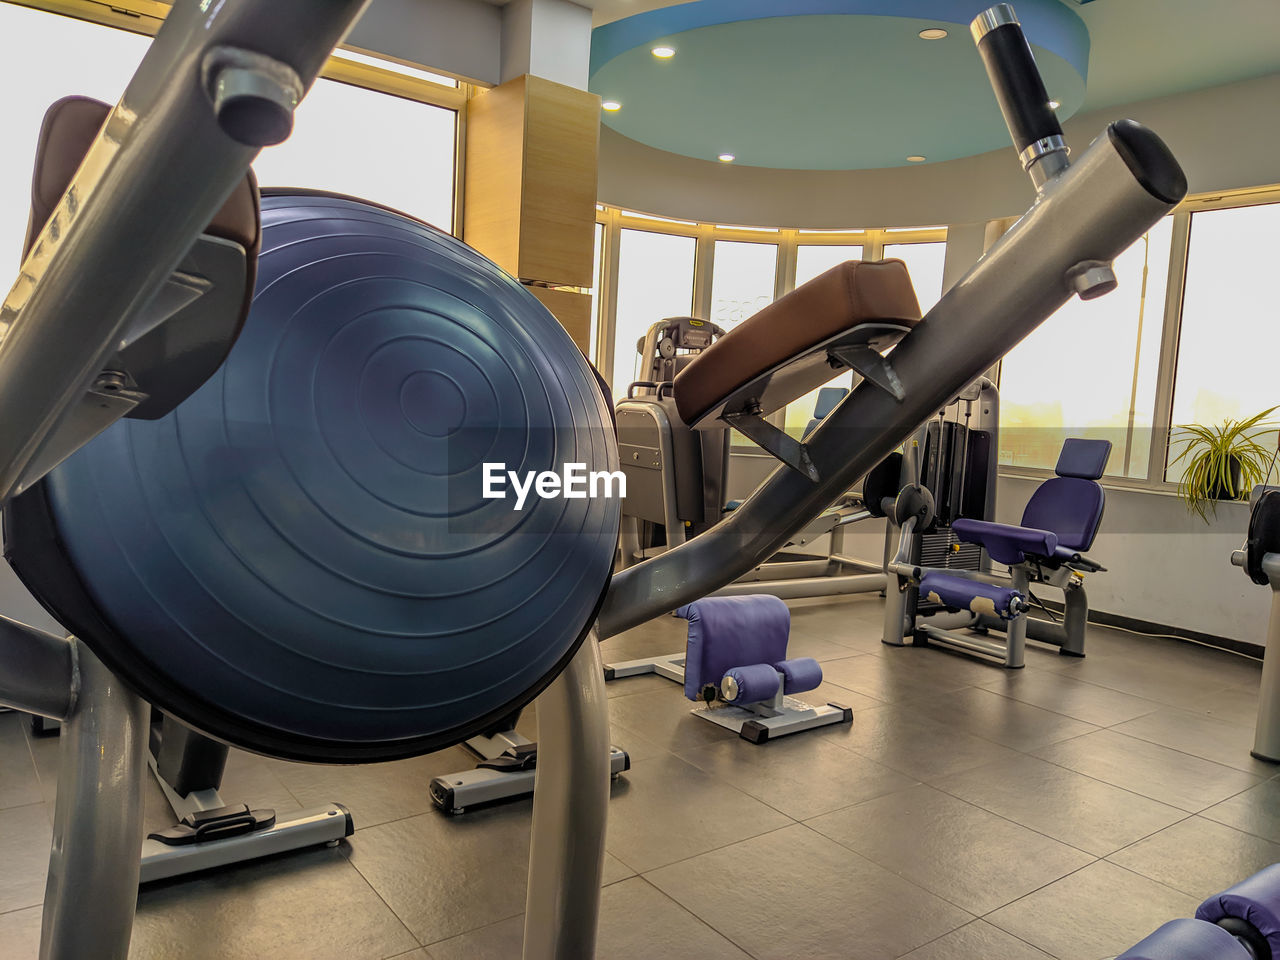 Exercise equipment in gym